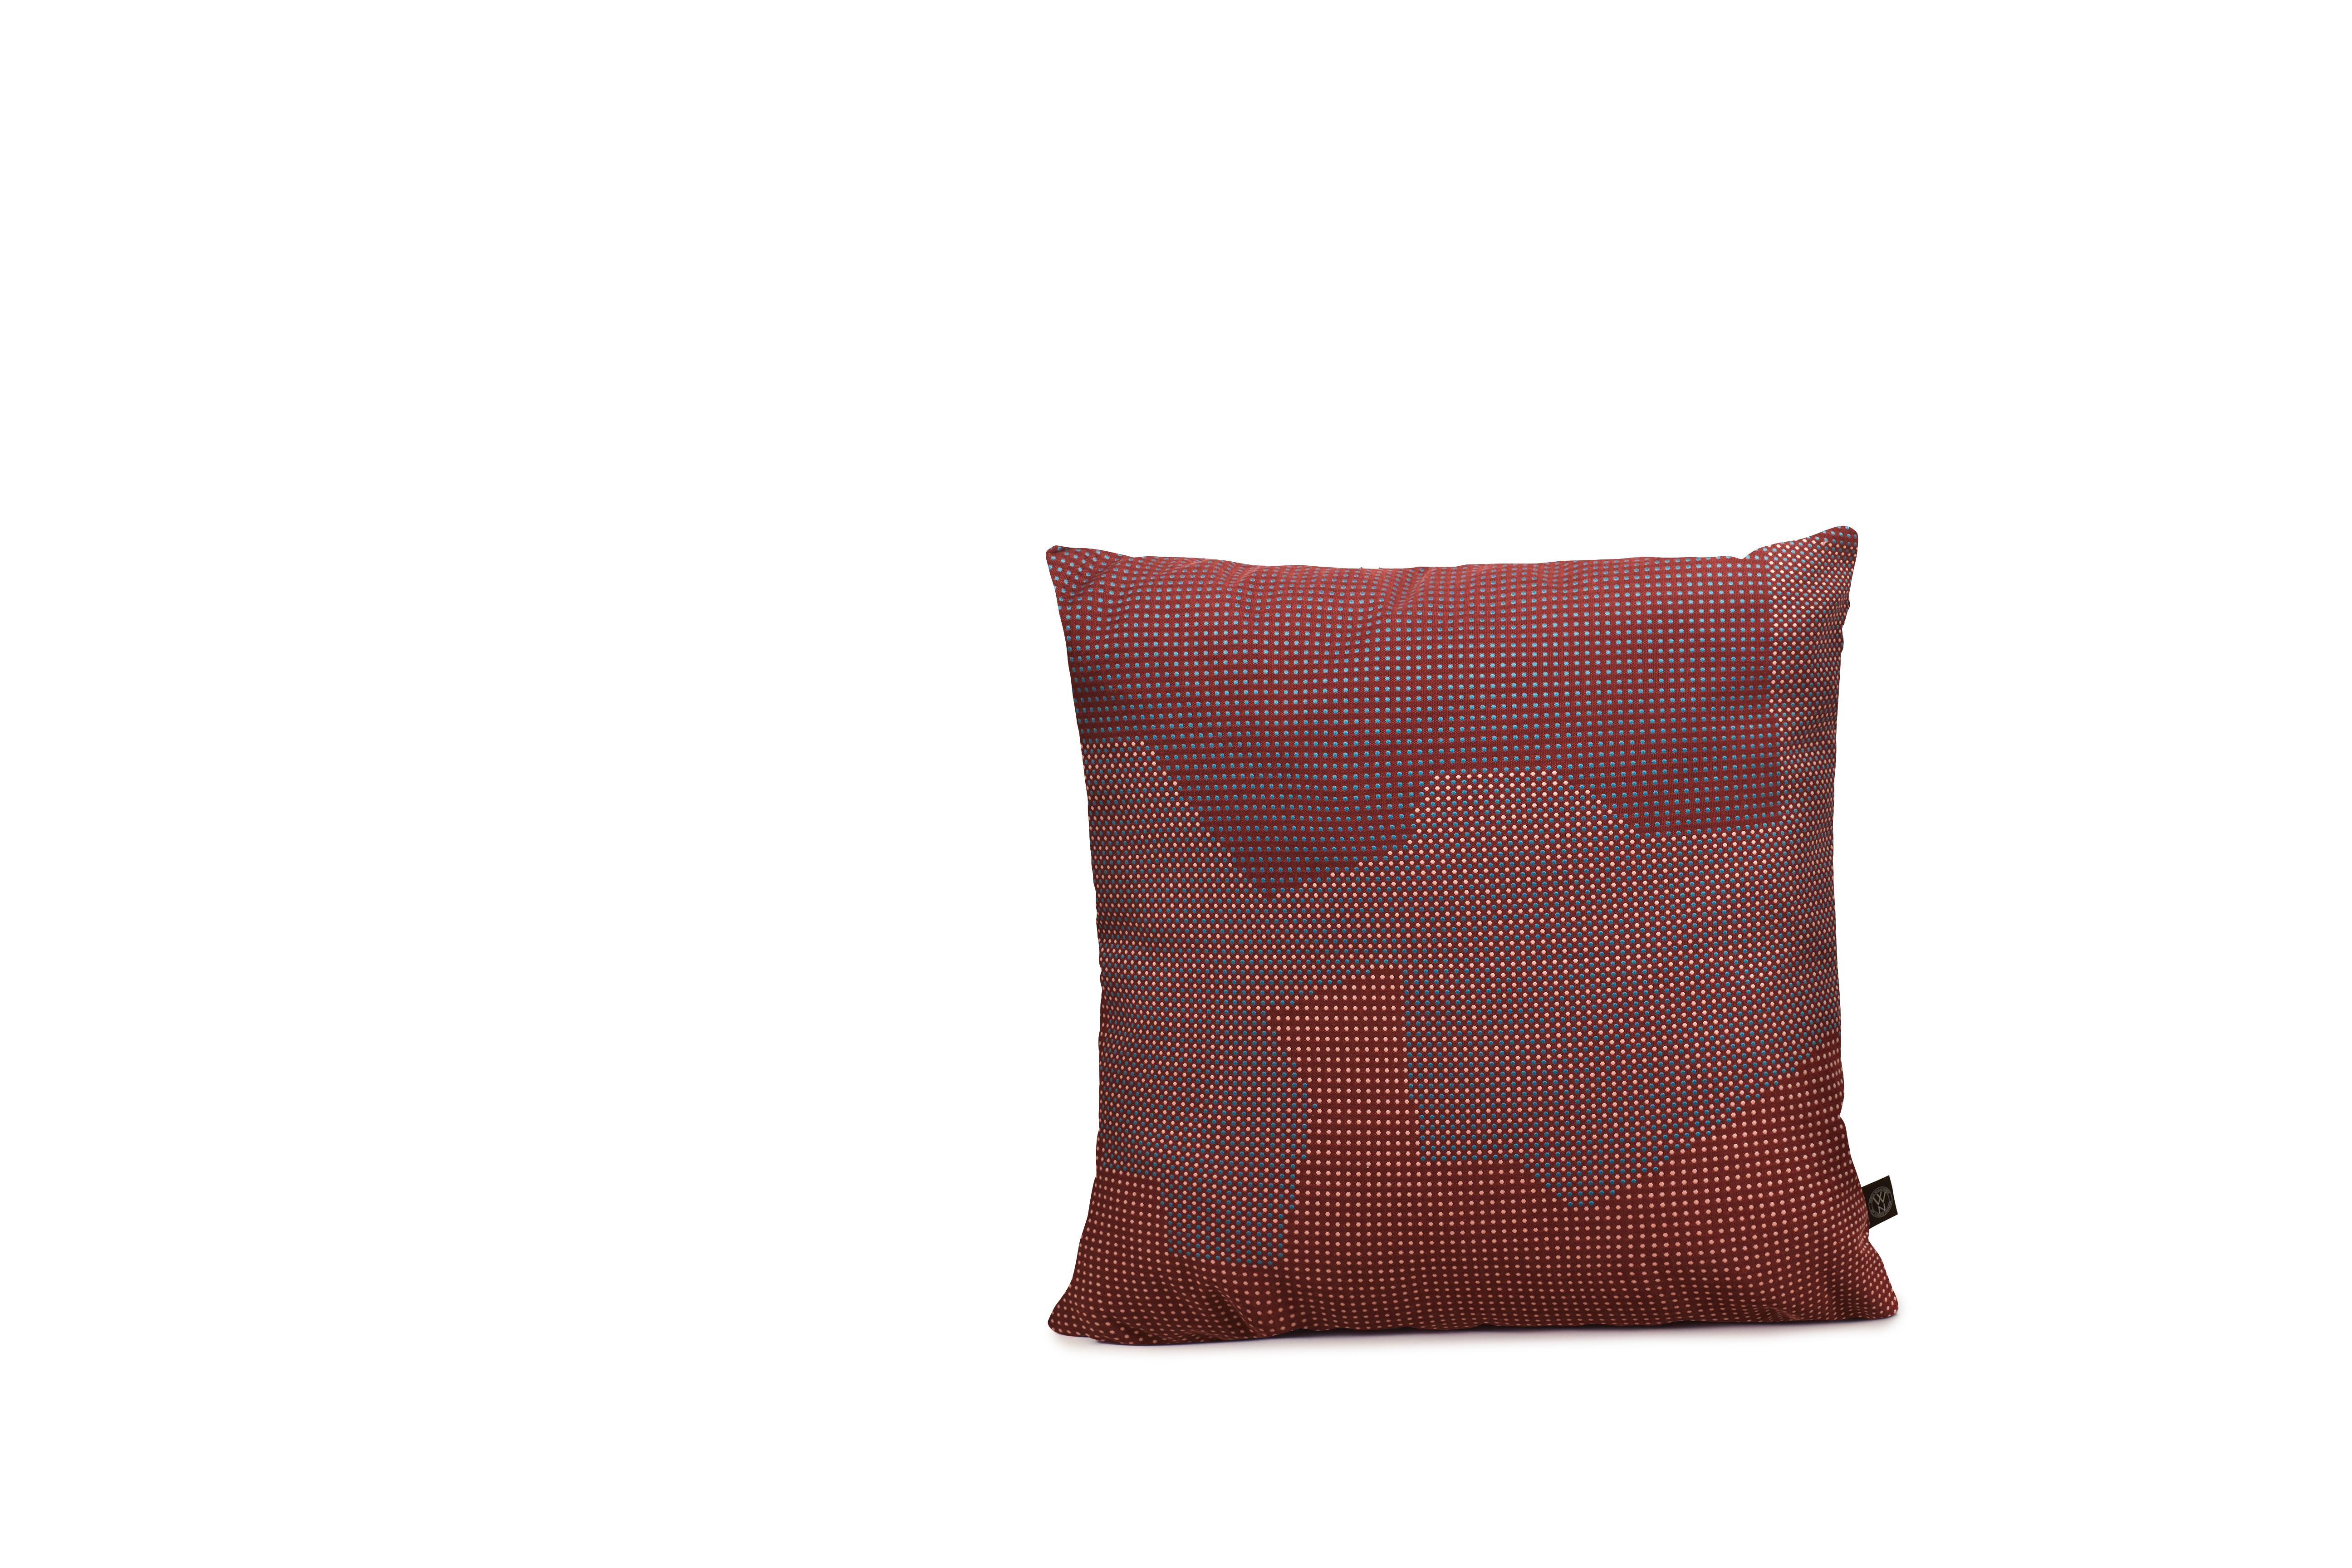 For Sale: Red (Meadow) Sprinkle Map Cushion, by Warm Nordic